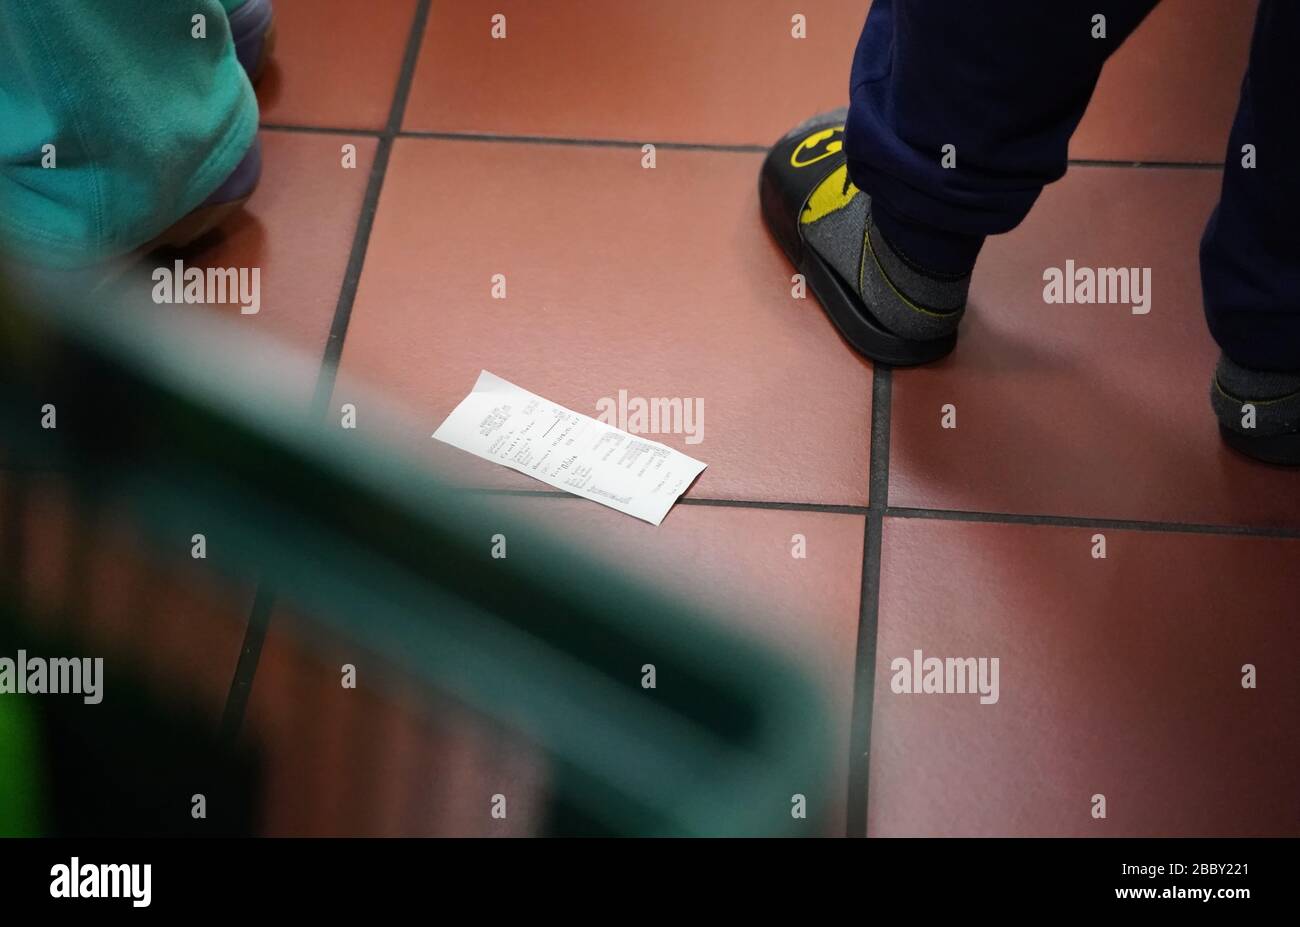 New York, NY / USA - February 28, 2020: A discarded receipt lies on the grocery store floor Stock Photo